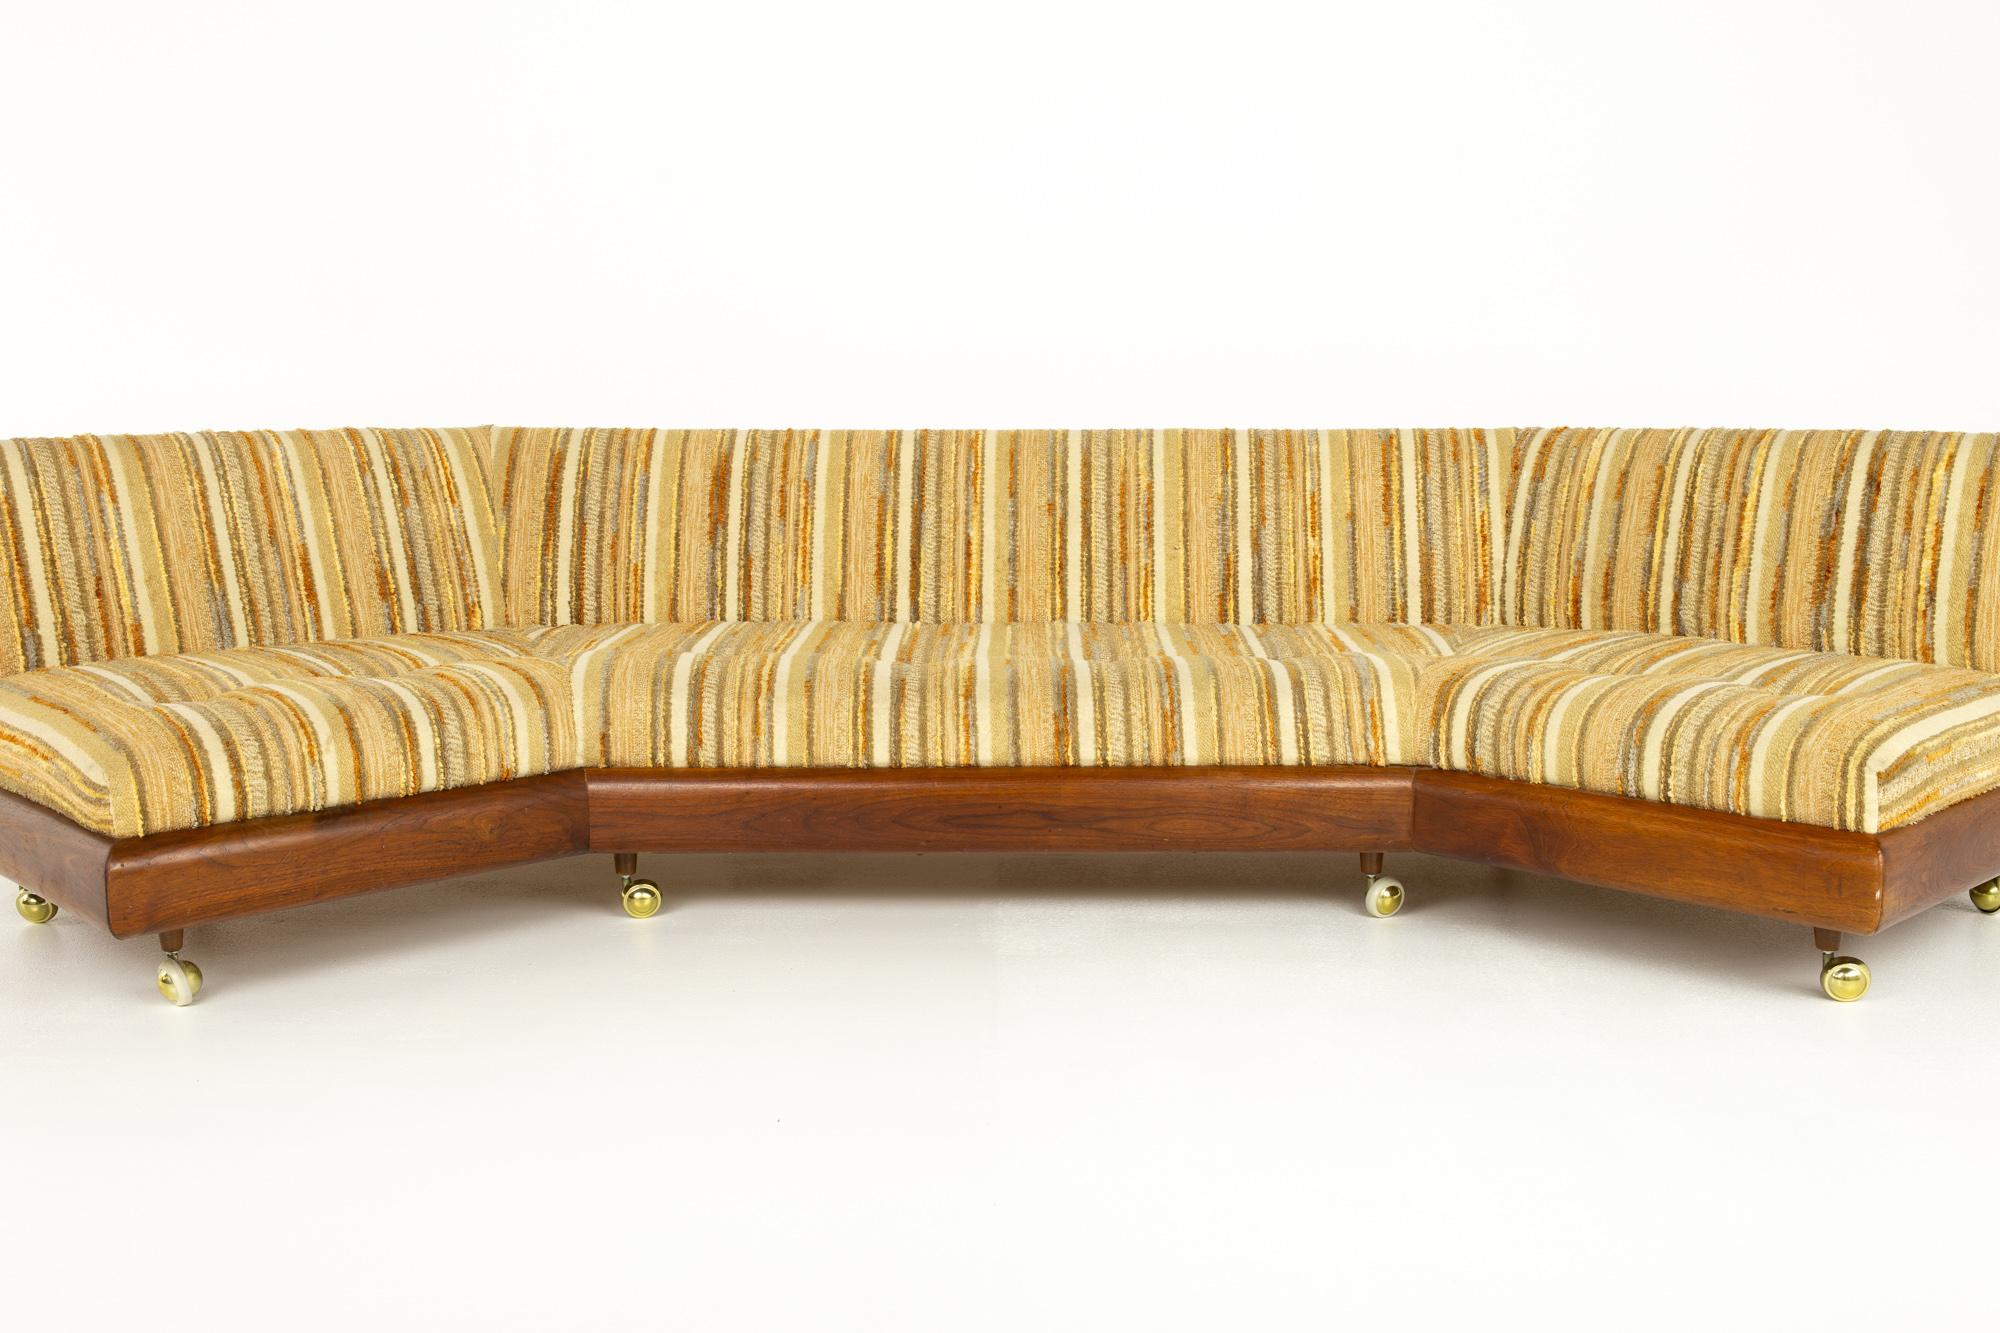 Adrian Pearsall mid century walnut and velvet boomerang storage sofa

This sofa measures: 128 wide x 50 deep x 28 inches high, with a seat height of 16 inches

?All pieces of furniture can be had in what we call restored vintage condition. That